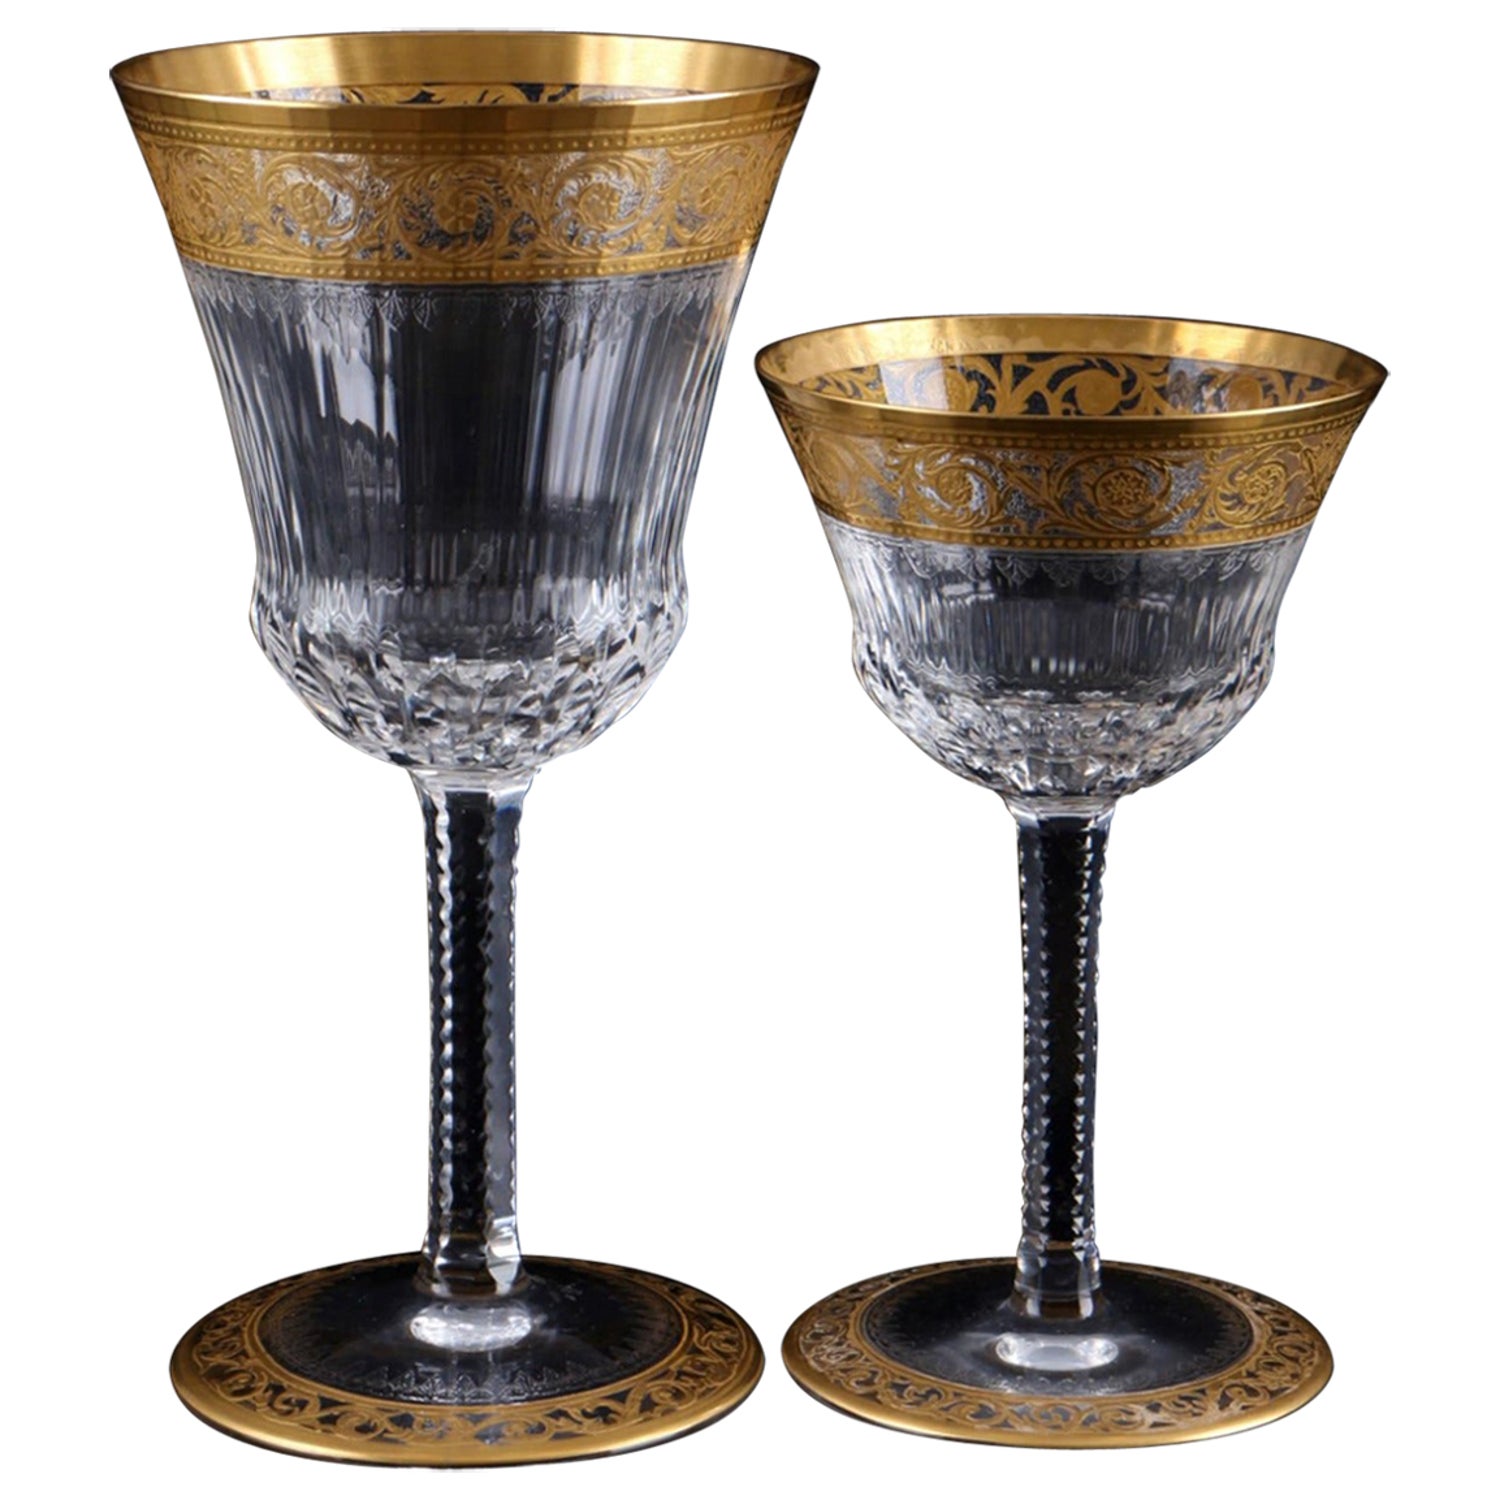 St. Louis Thistle Gold Wine and Sherry Glass For Sale at 1stDibs